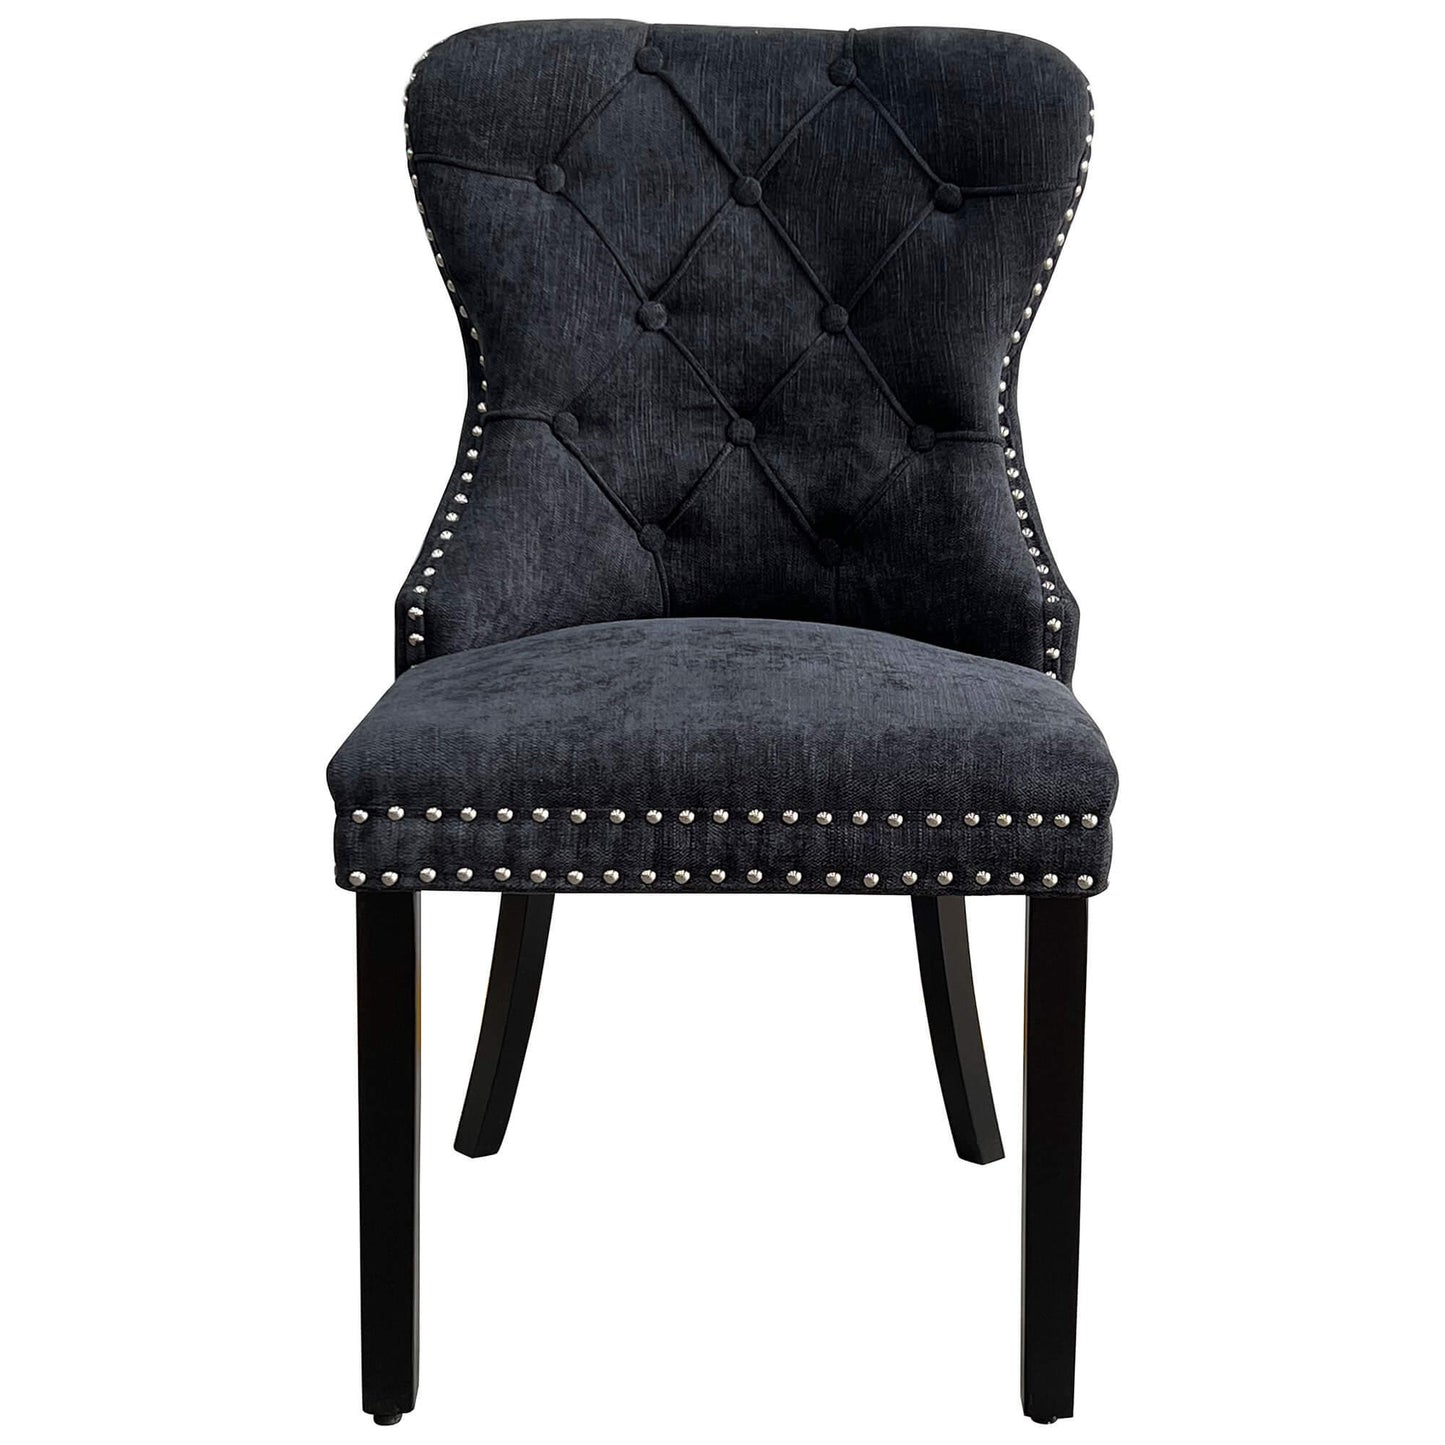 Genoa Version 1 | Fabric French Provincial Wooden Dining Chairs | Set Of 2 | Black